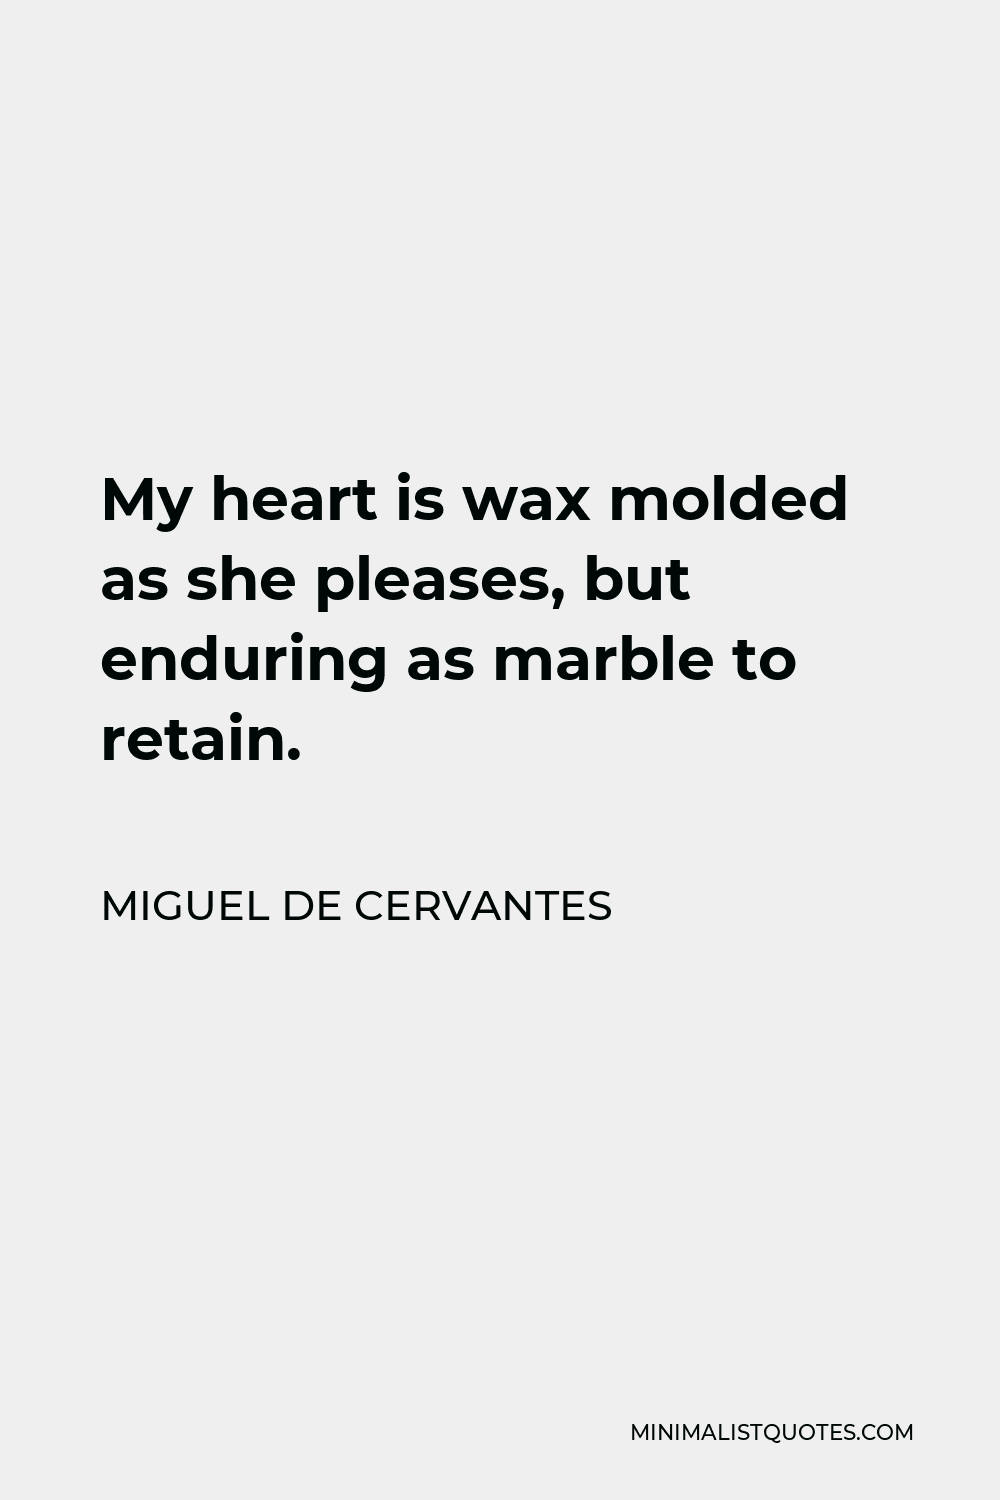 Miguel de Cervantes Quote - My heart is wax molded as she pleases, but enduring as marble to retain.